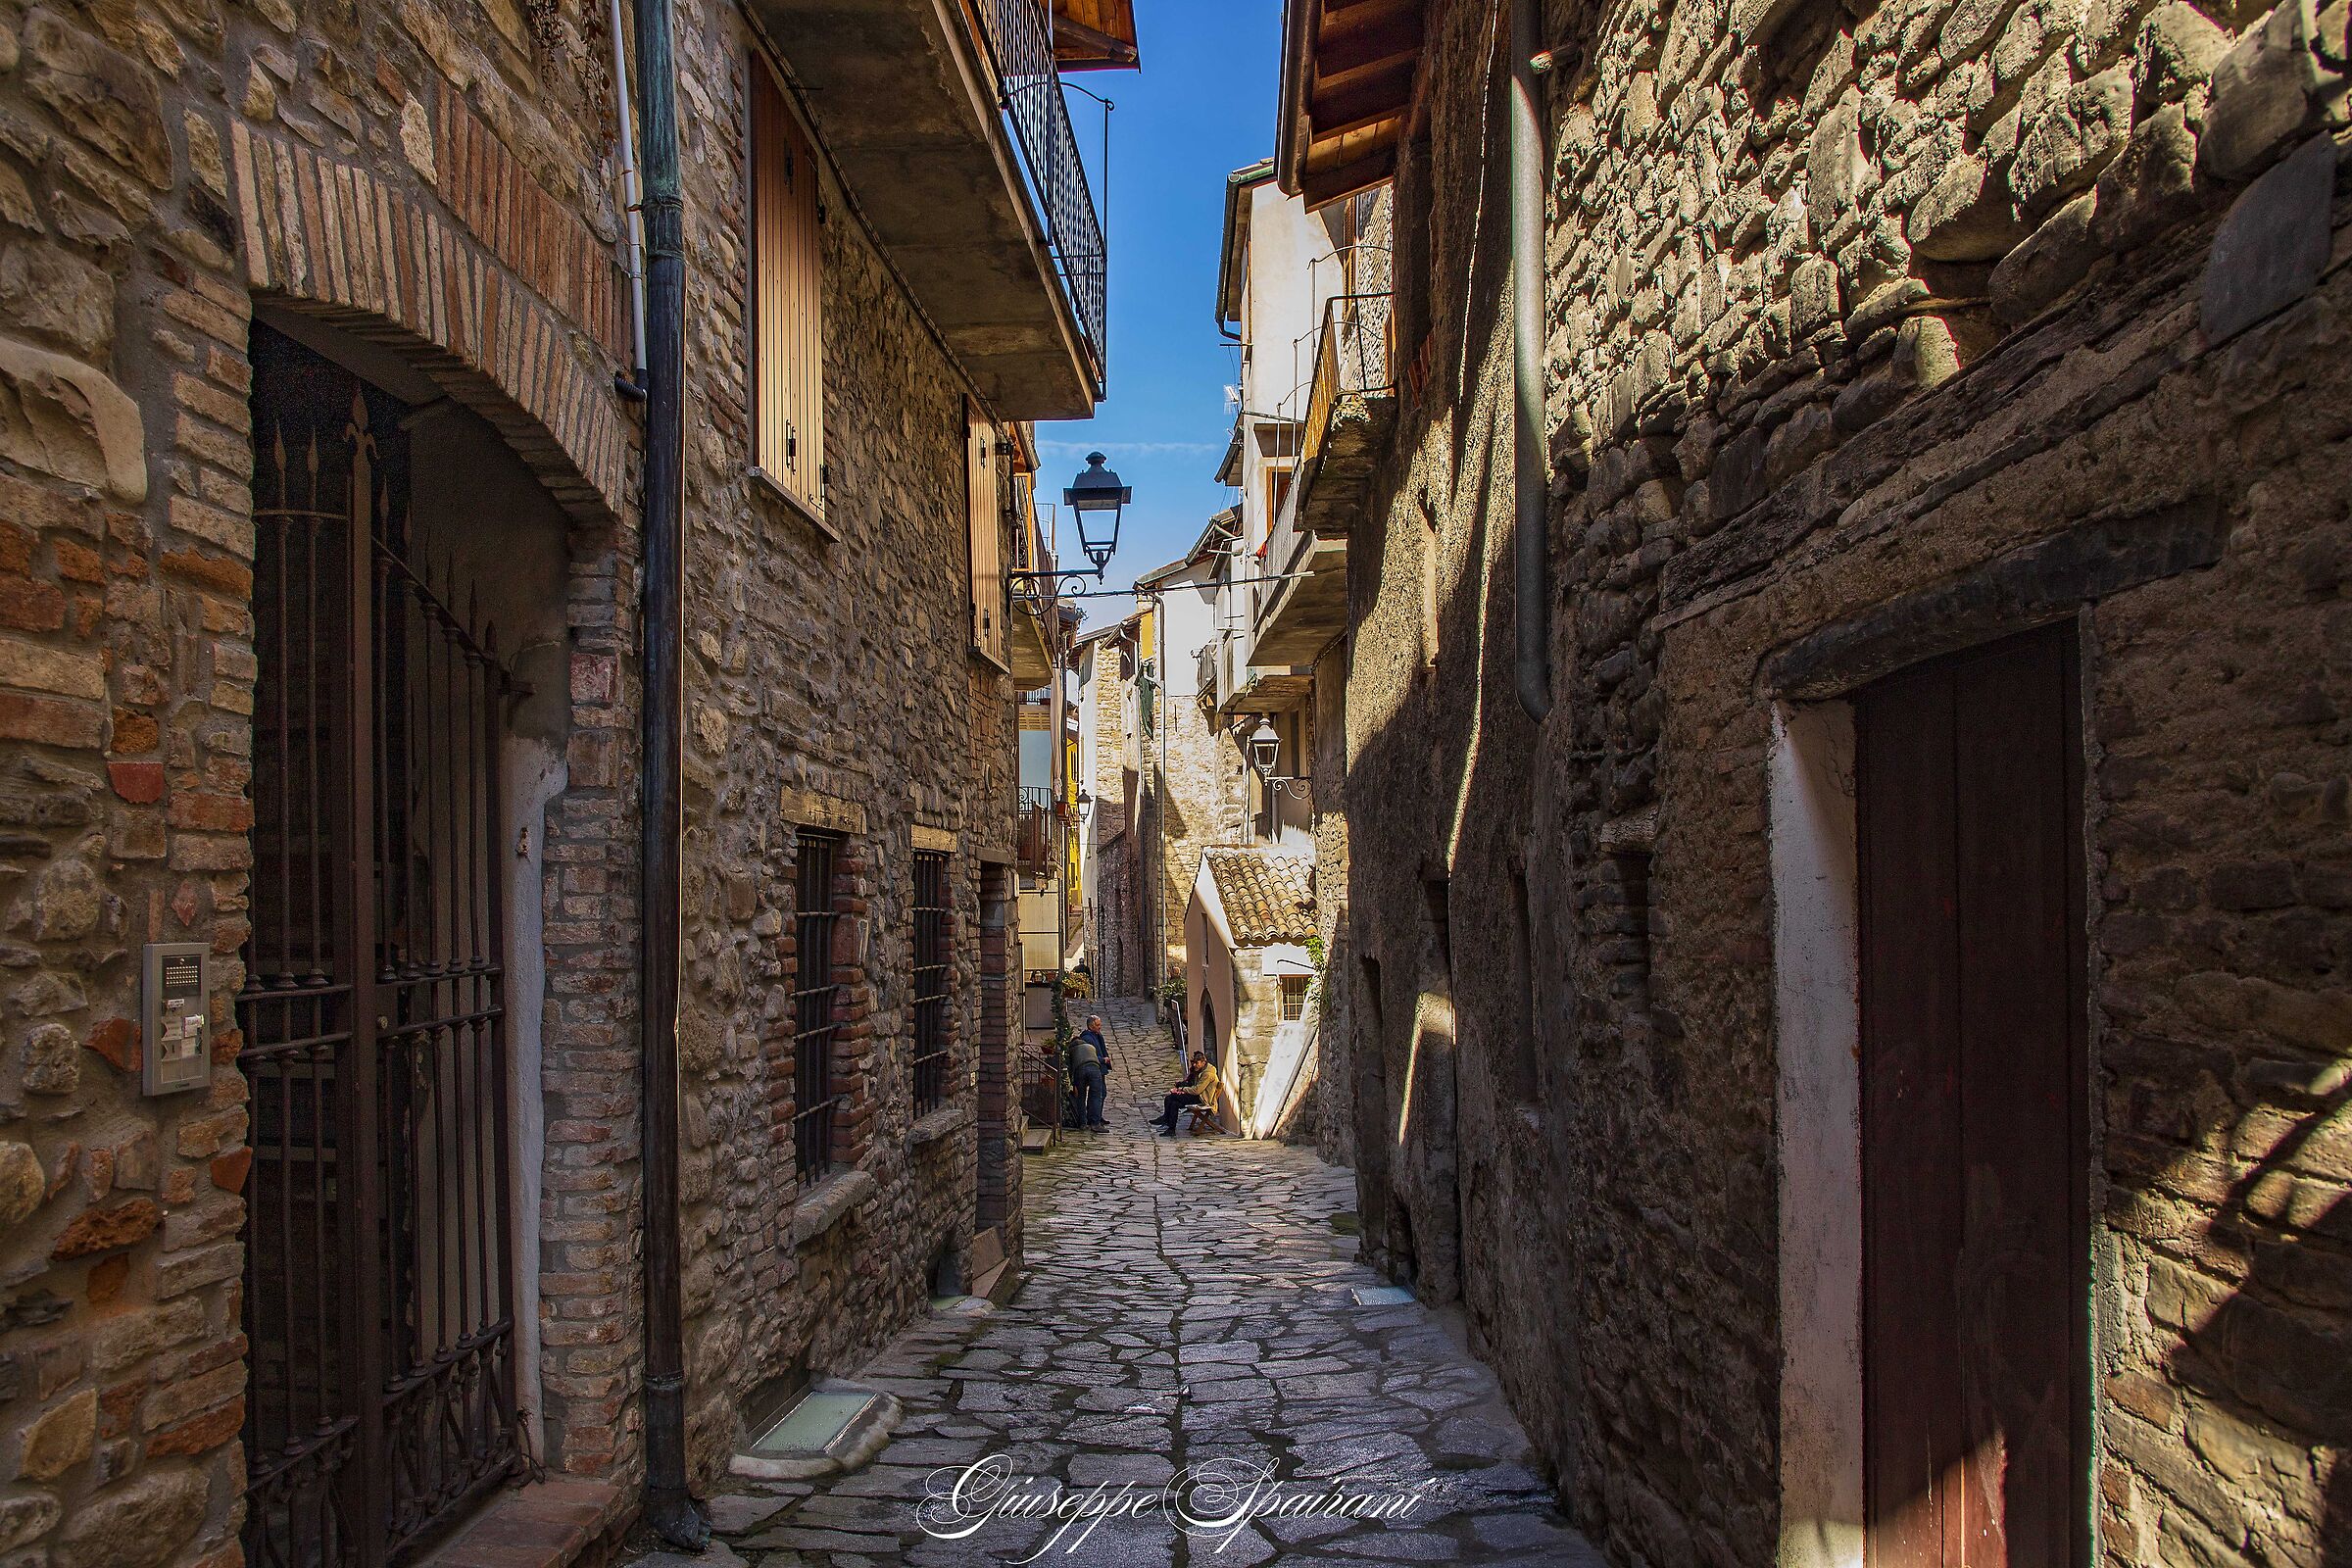 Varzi through the streets of the village...